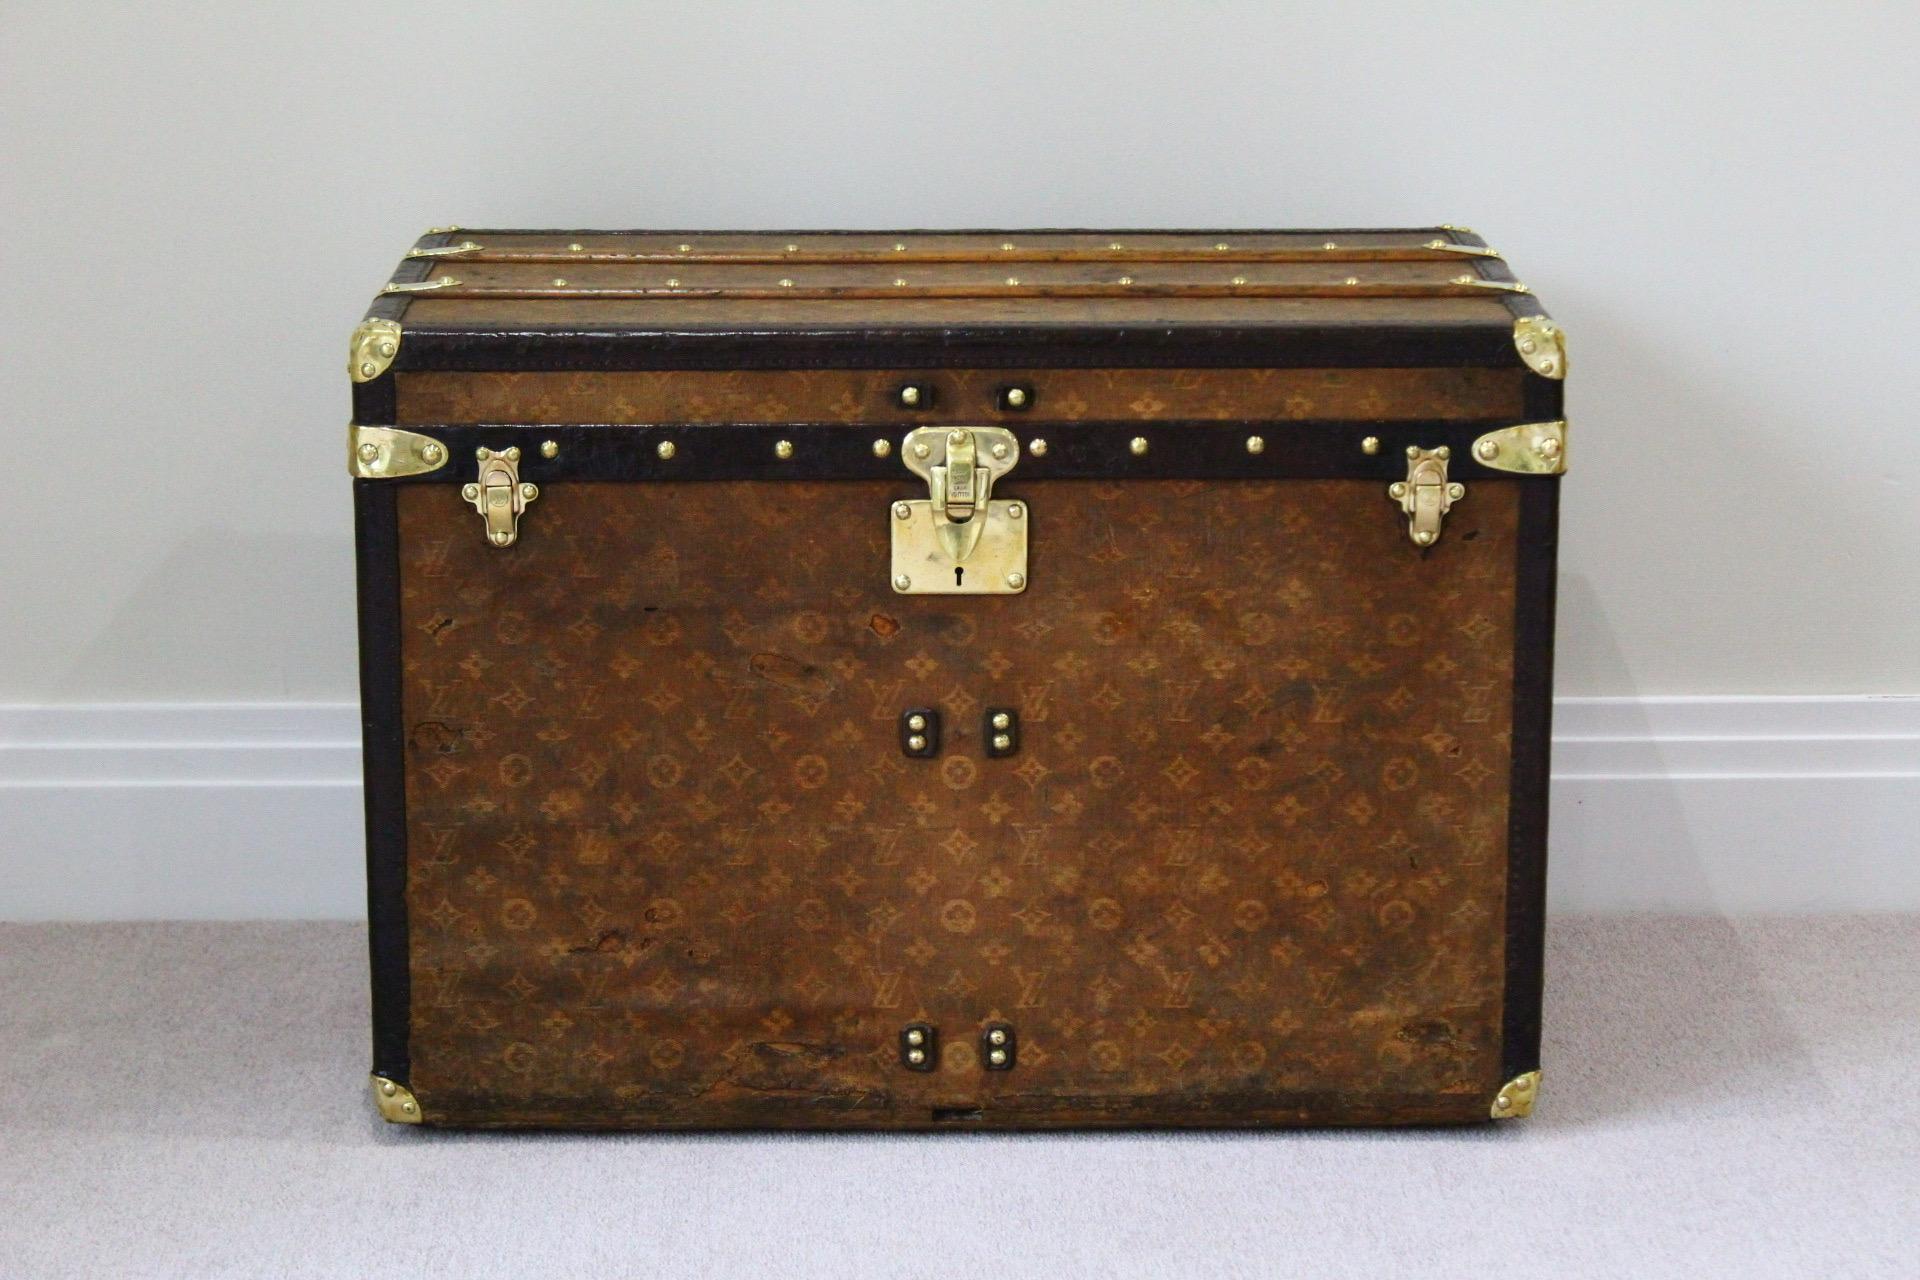 In Luxury We Trust offers a Louis Vuitton courier trunk finished in iconic monogram woven canvas, leather bounding, brass hardware and brass handles.

Condition Report: Good overall condition, leather in fair condition.

Please refer to the photos